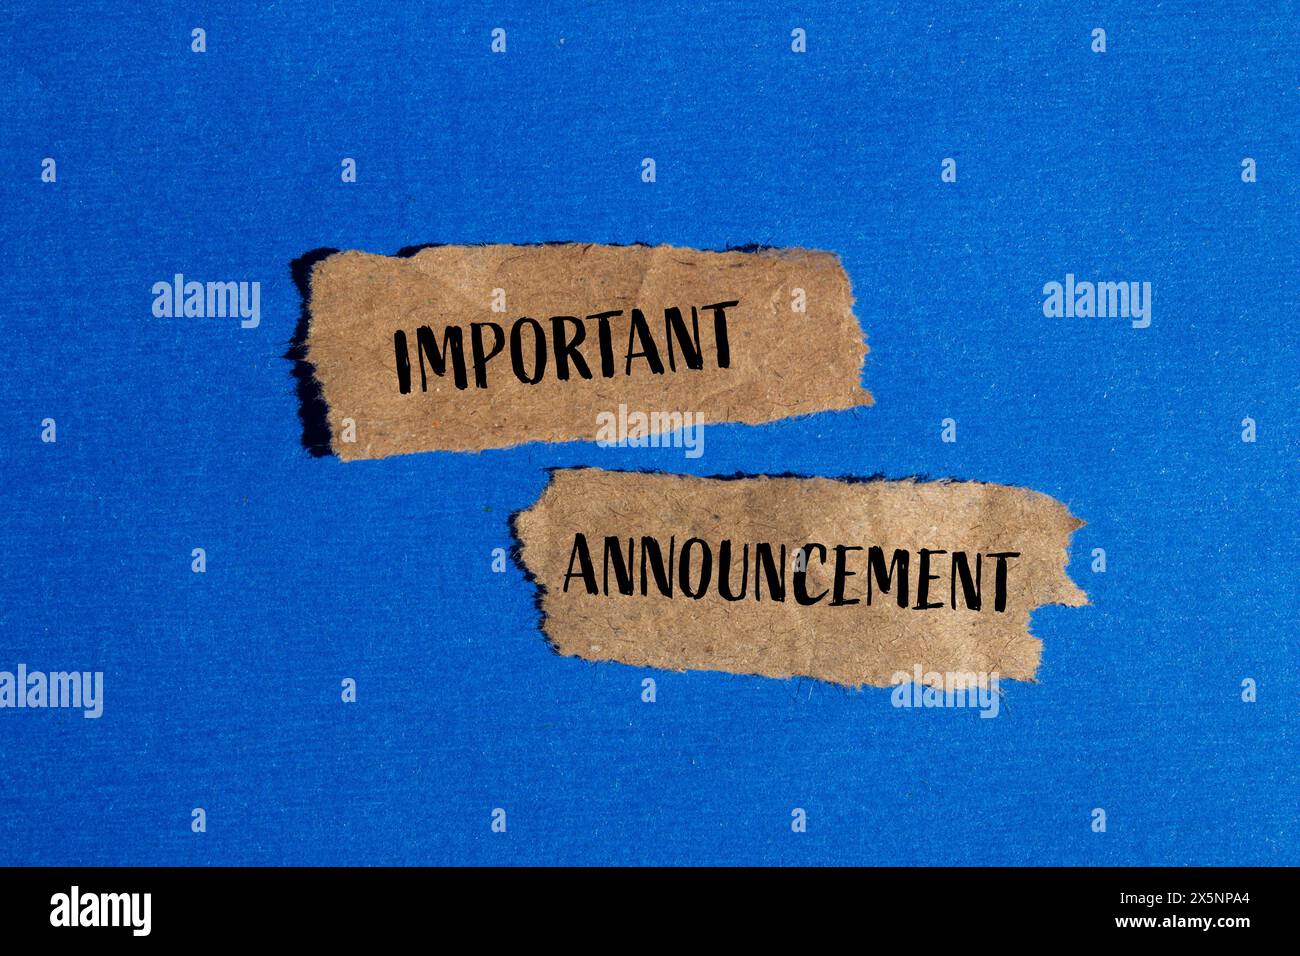 Important announcement words written on torn brown paper pieces with blue background. Conceptual important announcement symbol. Copy space. Stock Photo